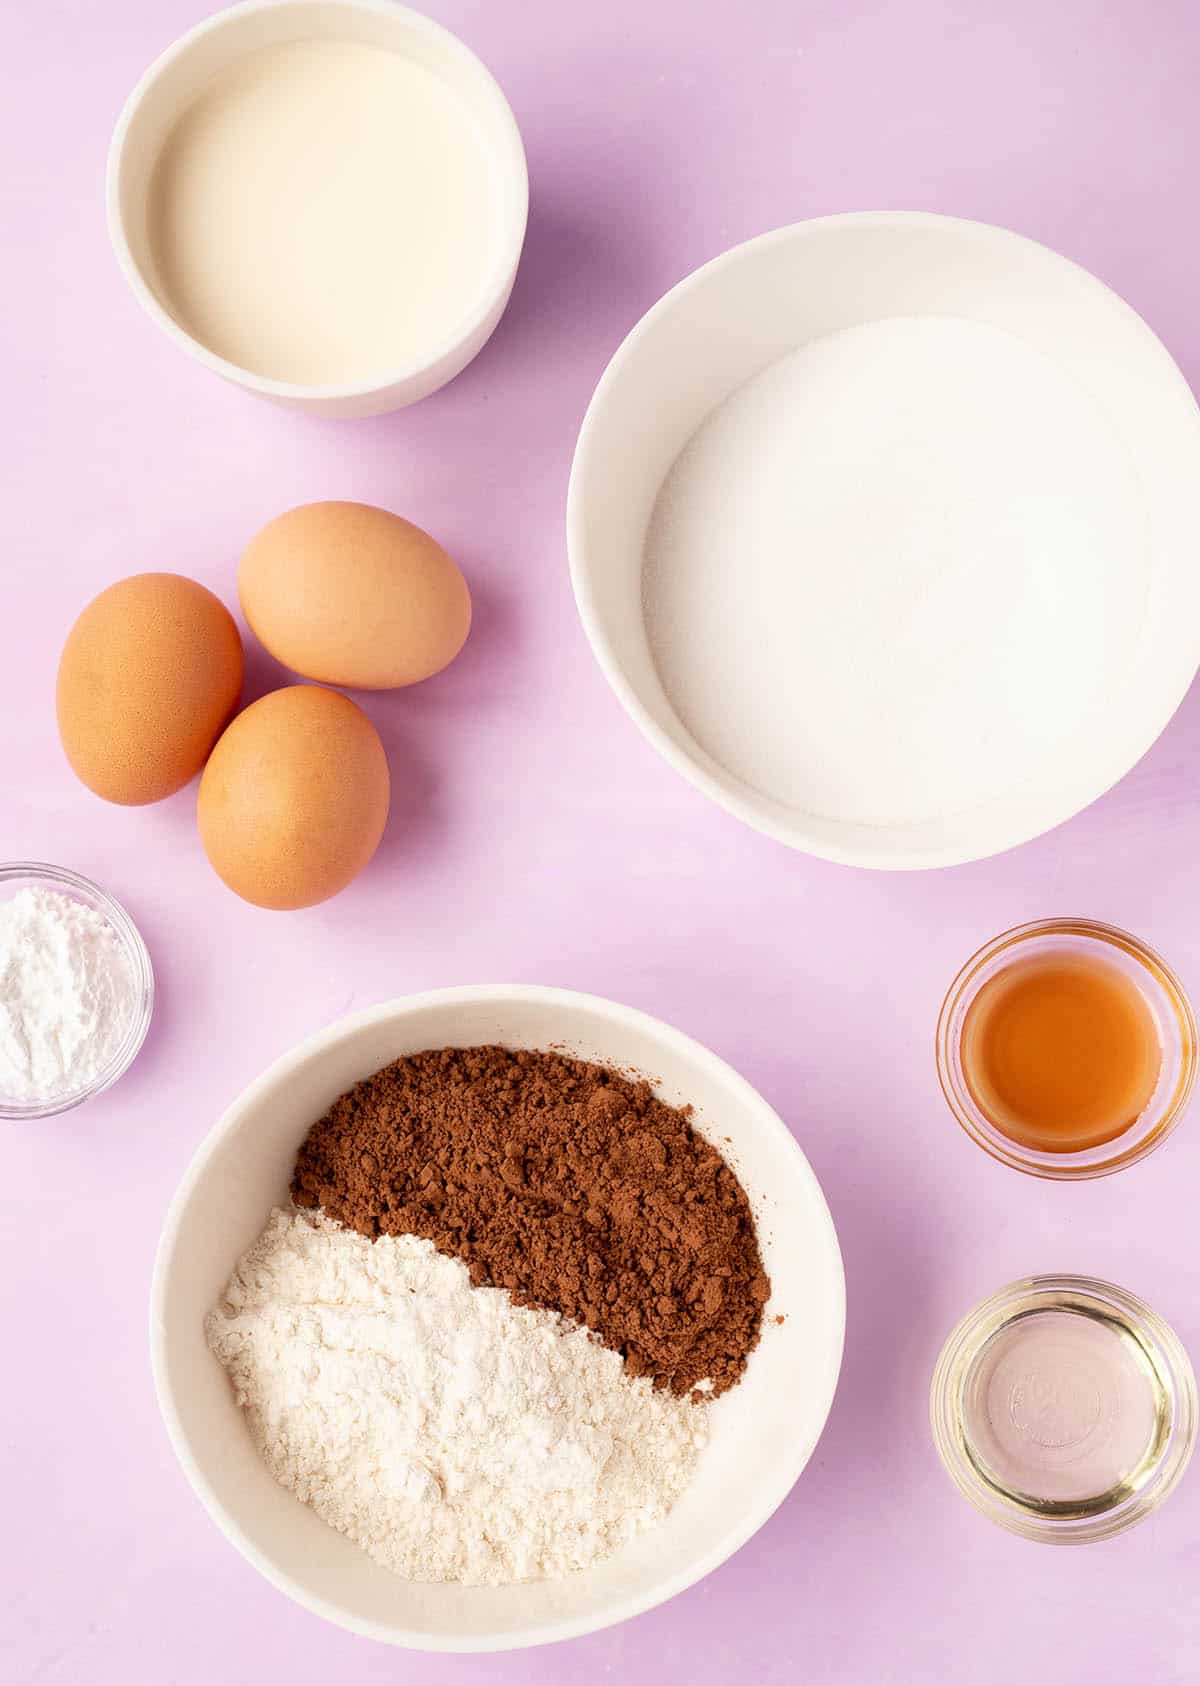 All the ingredients needed to make a Chocolate Cake Roll from scratch on a purple backdrop. 